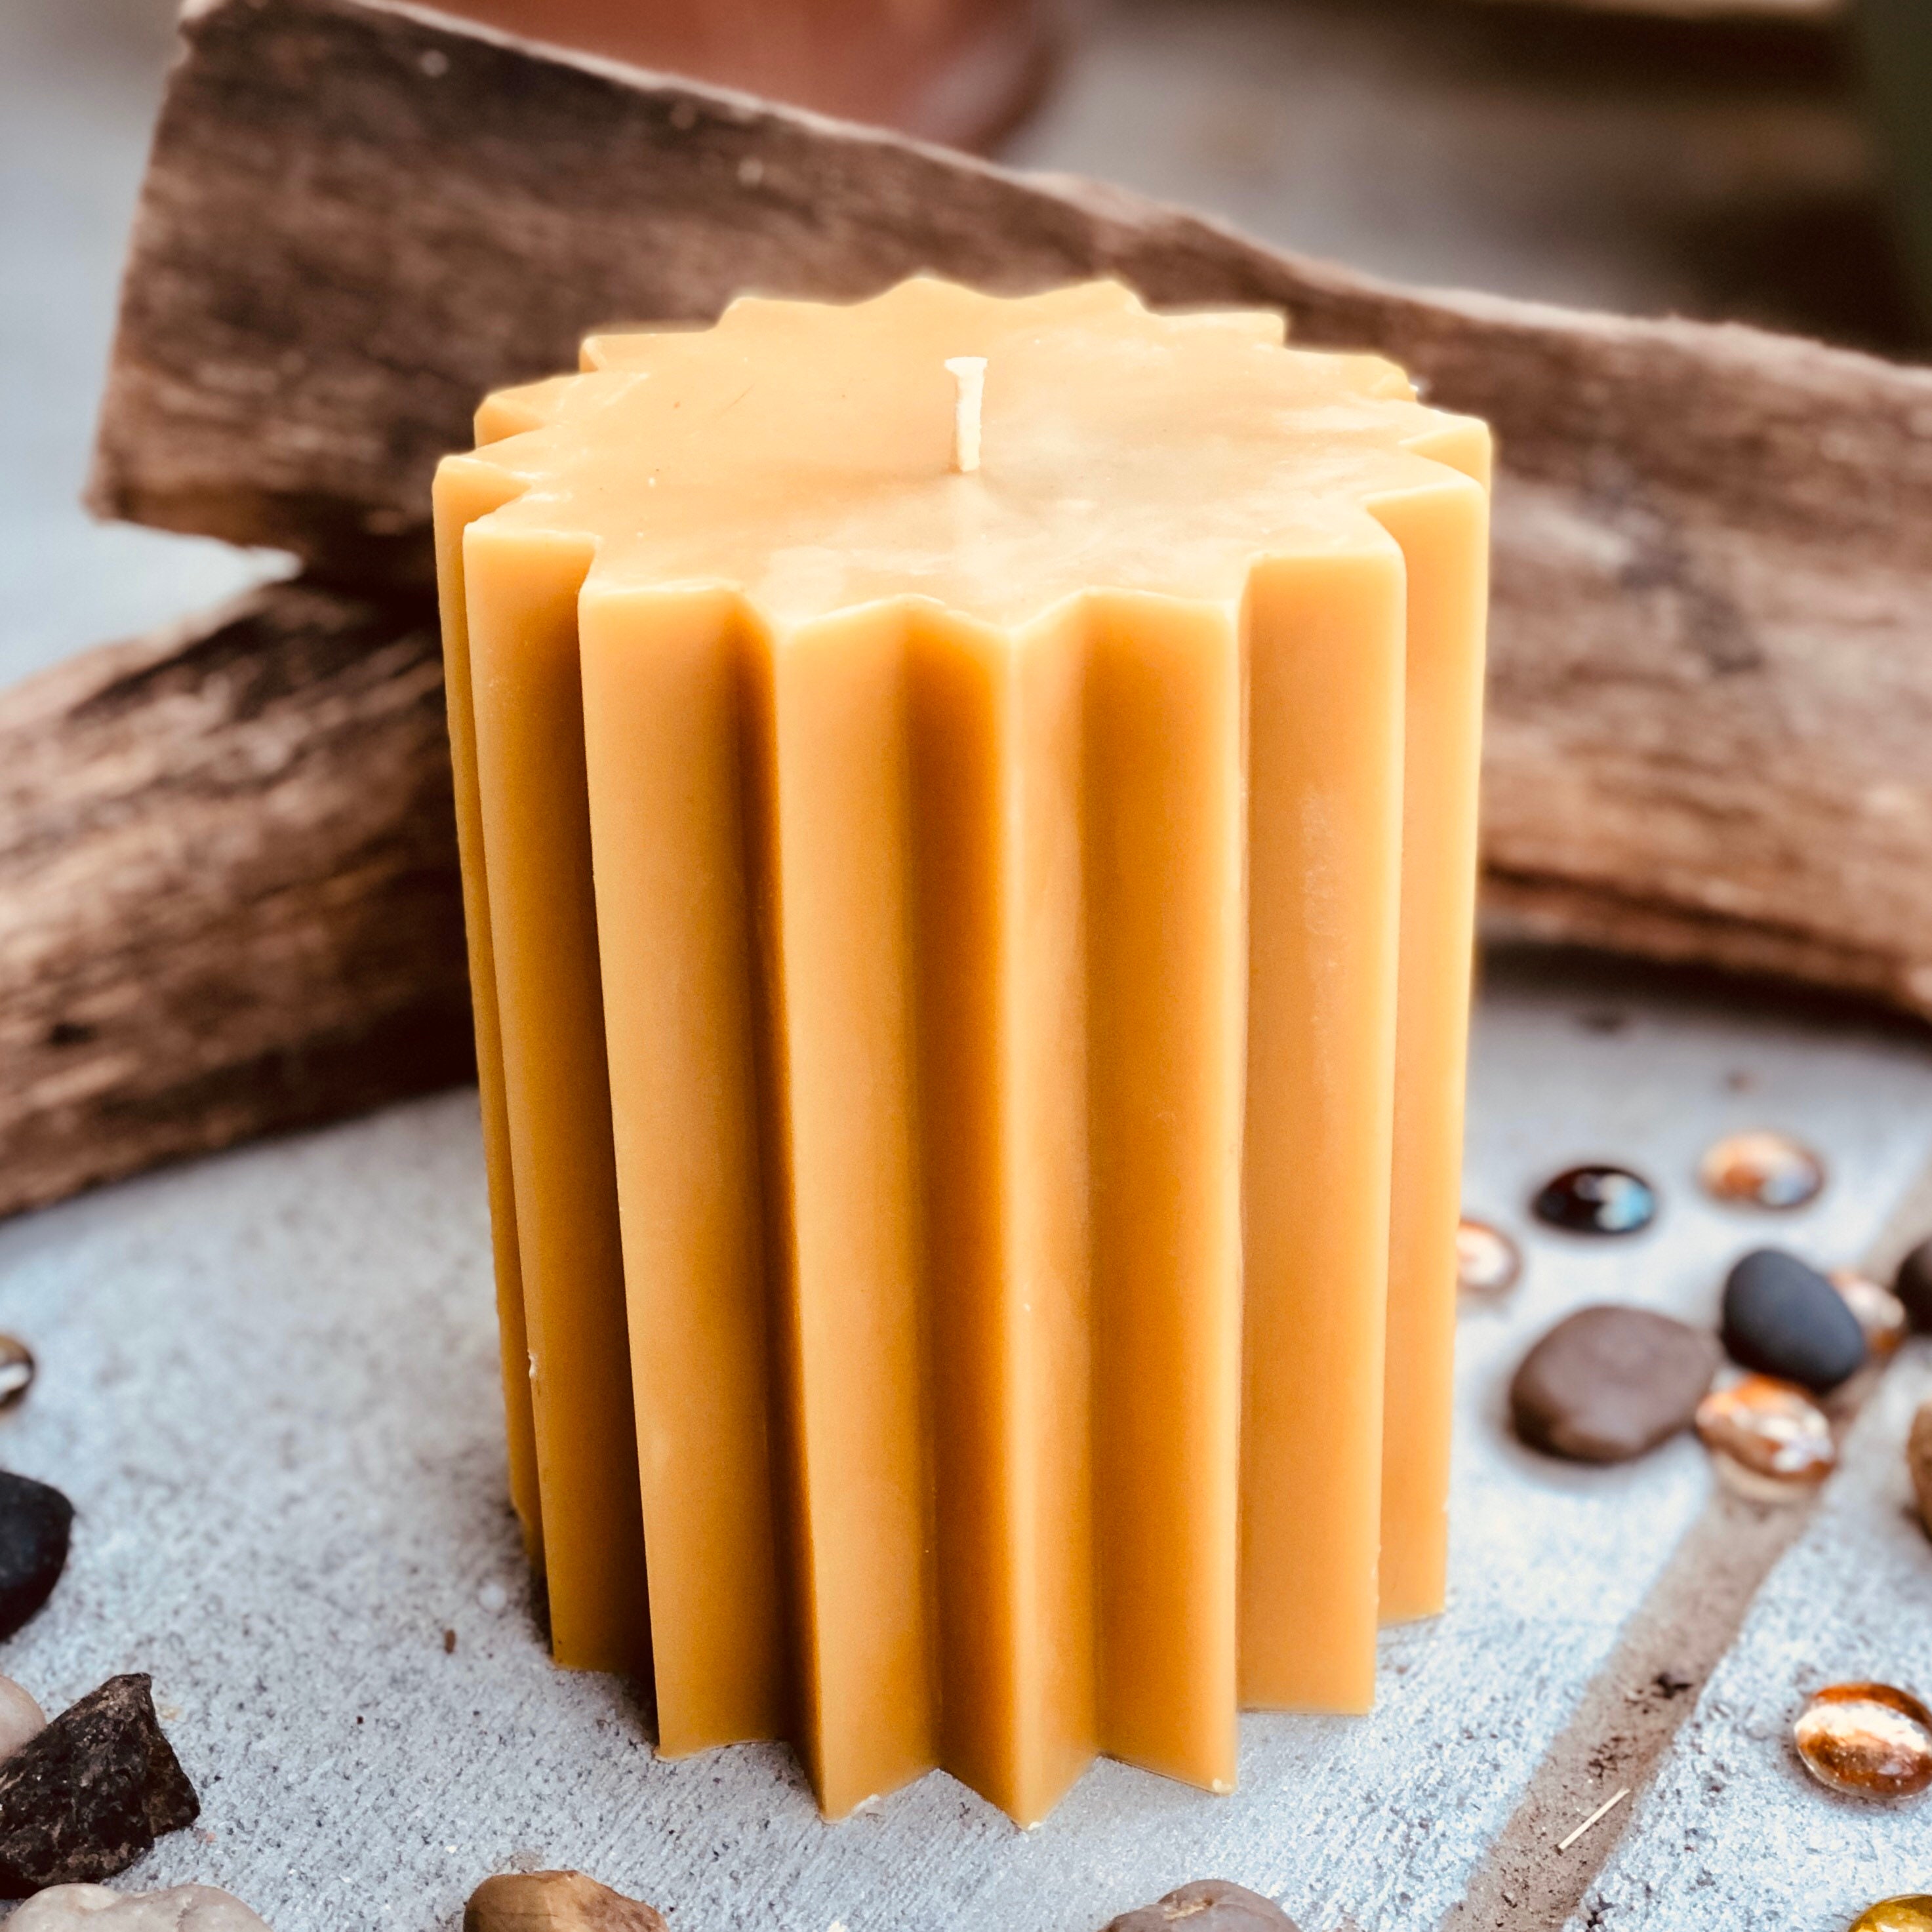 100% Pure Beeswax Pillar Candle-5” wide Beeswax Pillar Candle